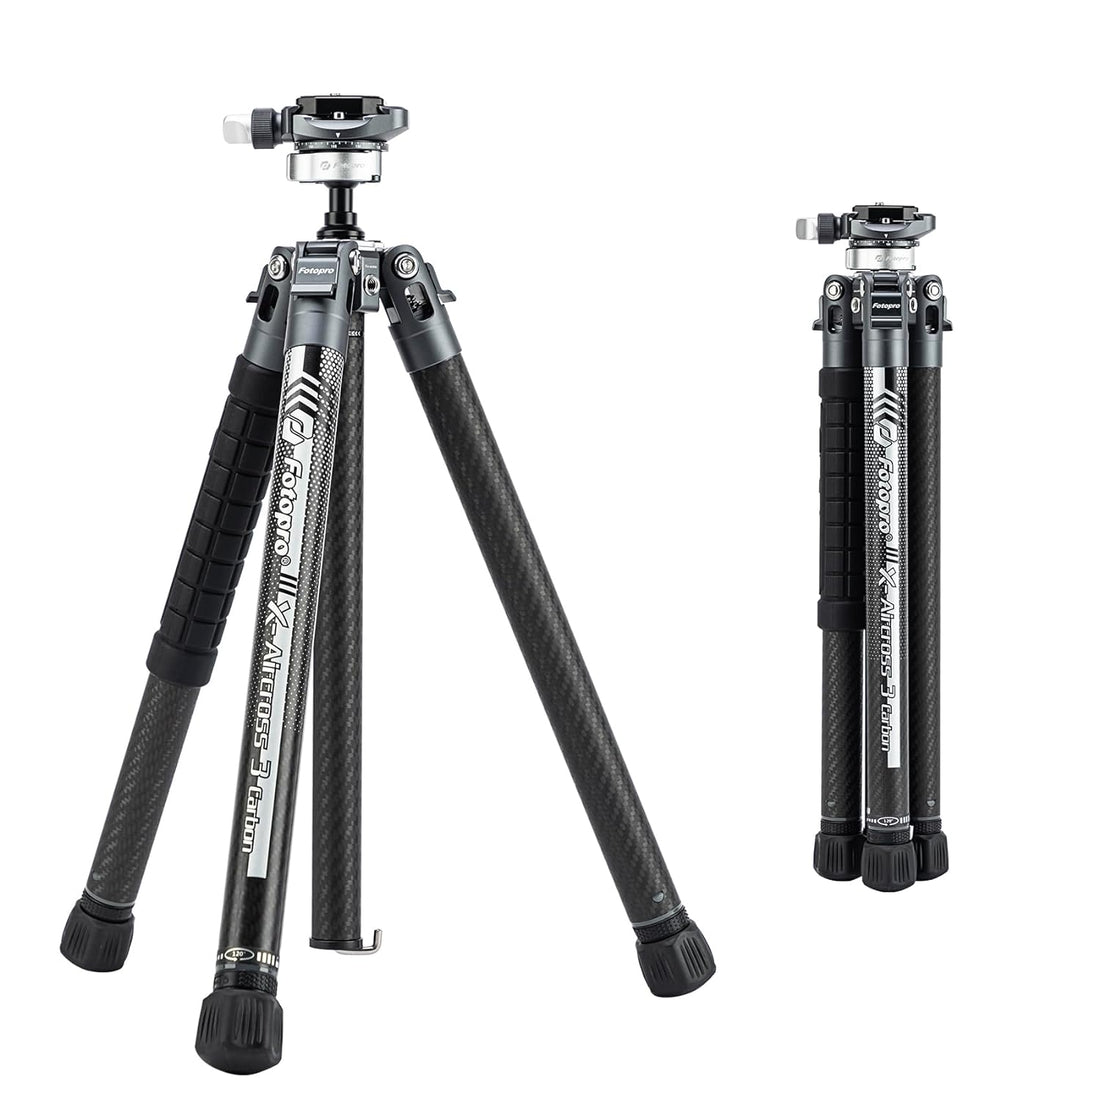 Fotopro X-Aircross 3 Lite 62 Inch Lightweight Travel Camera Tripod with Panoramic Ball Head 1.78lbs Ultra Light Portable Professional Travel Carbon Fiber Tripod for Camera DSLR Load up to 22lbs Grey